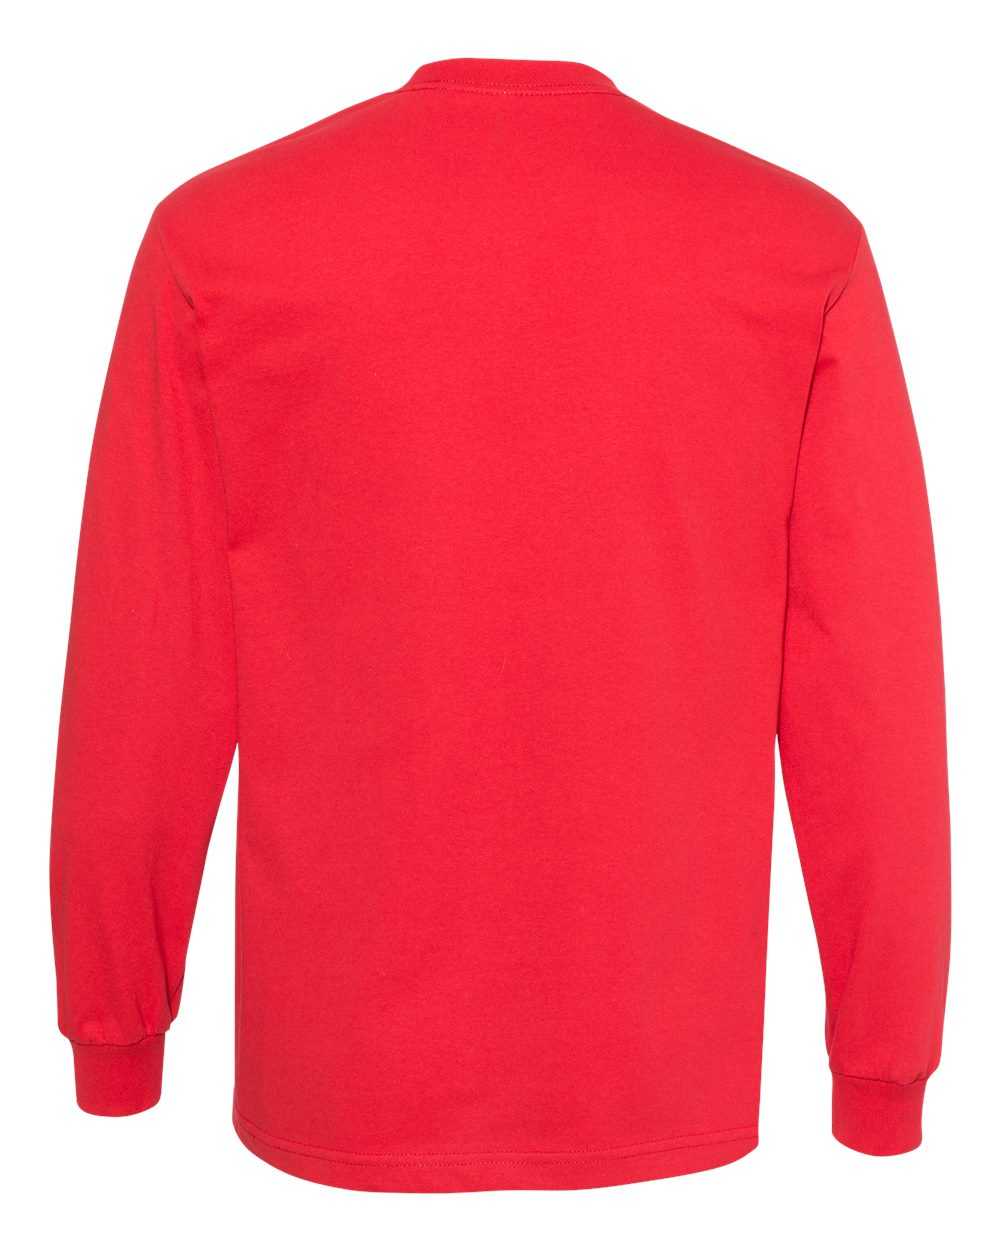 American Apparel 1304 Unisex Heavyweight Cotton Long Sleeve T-Shirt - Red - HIT a Double